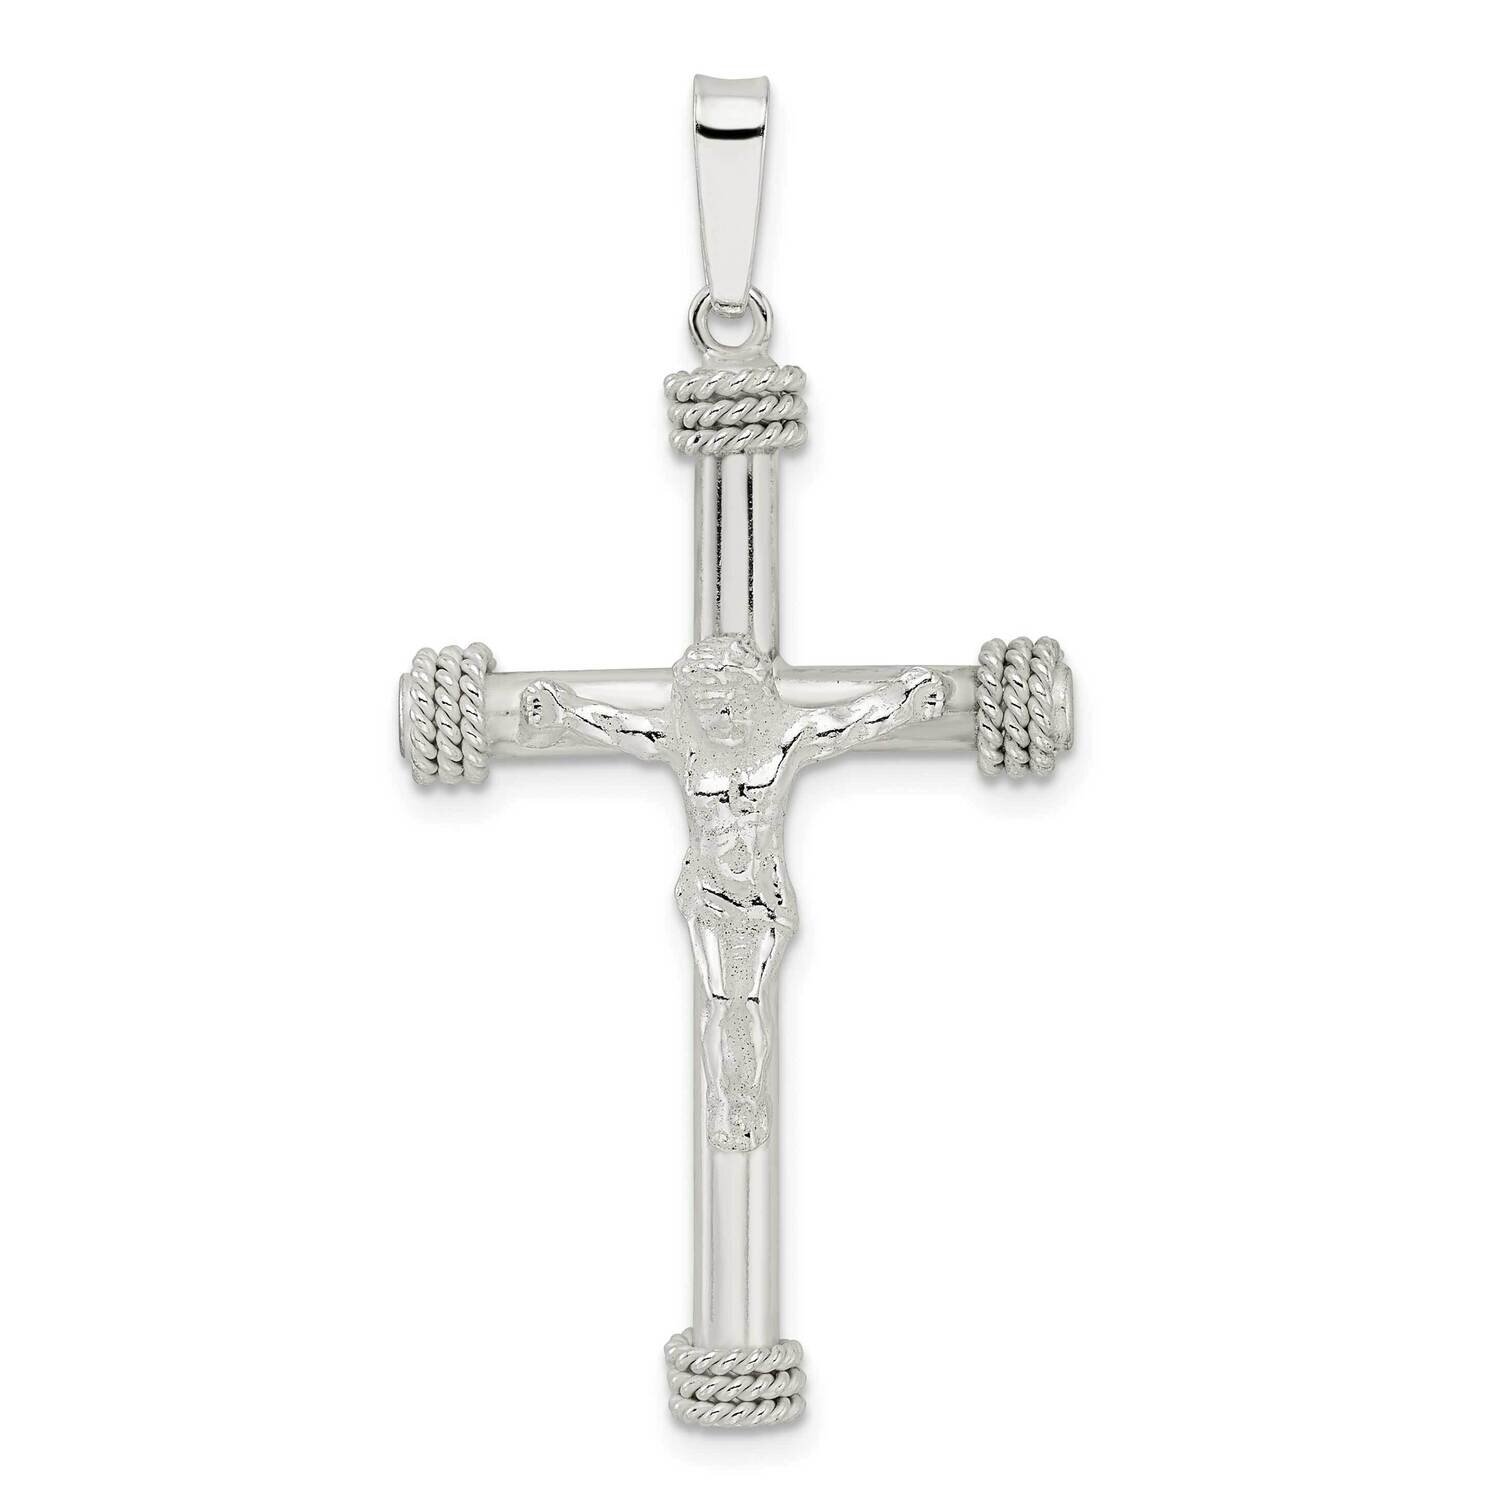 Rope Ends Hollow Crucifix Pendant Sterling Silver Polished QC11182